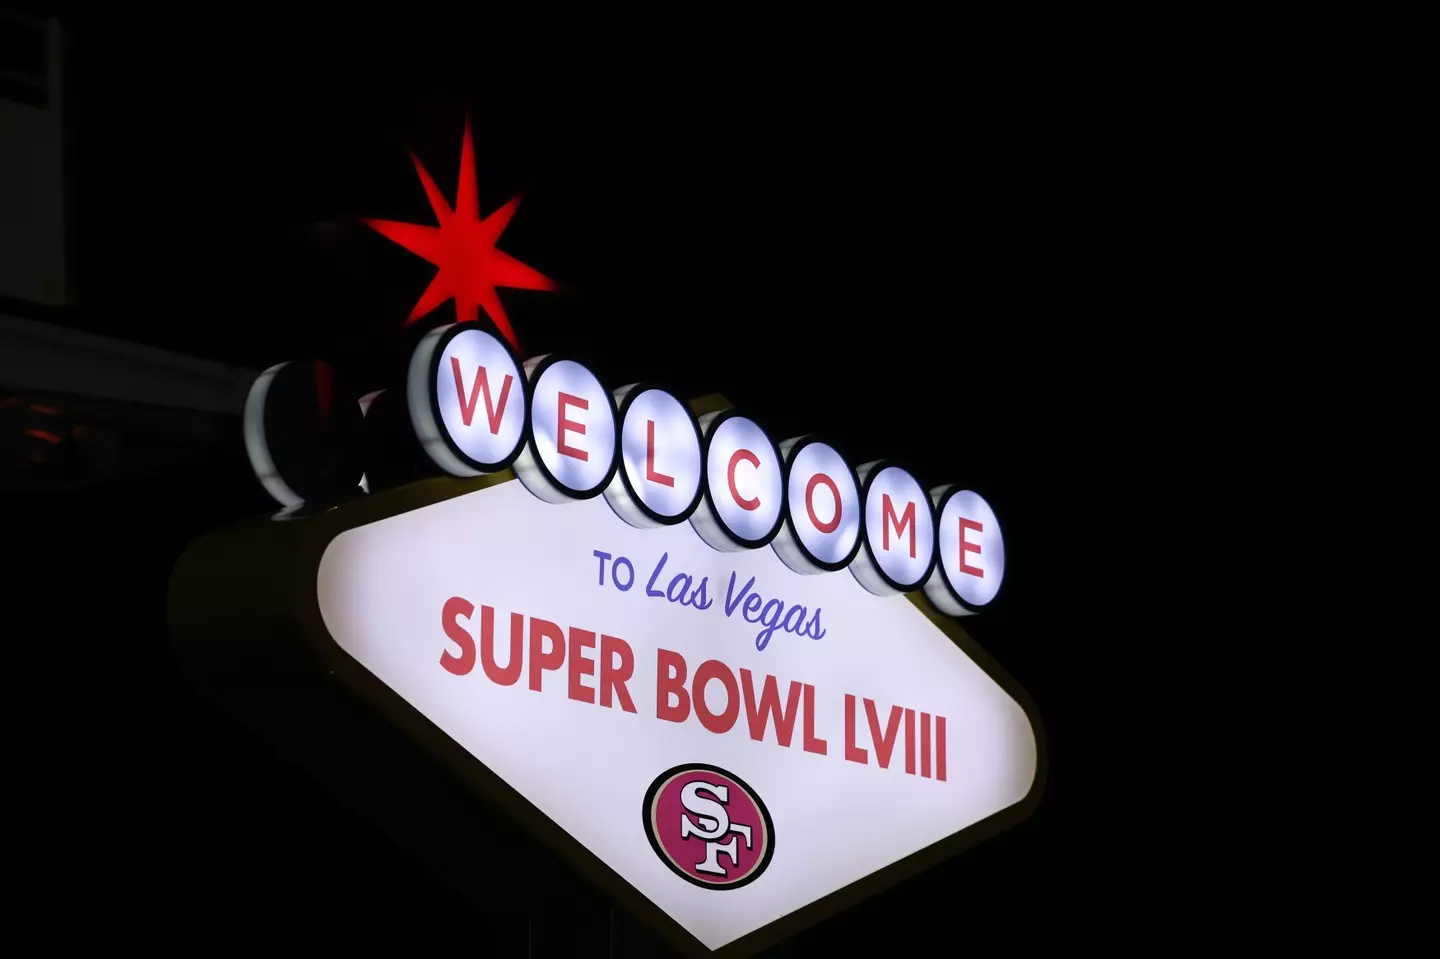 The Super Bowl is in Vegas.